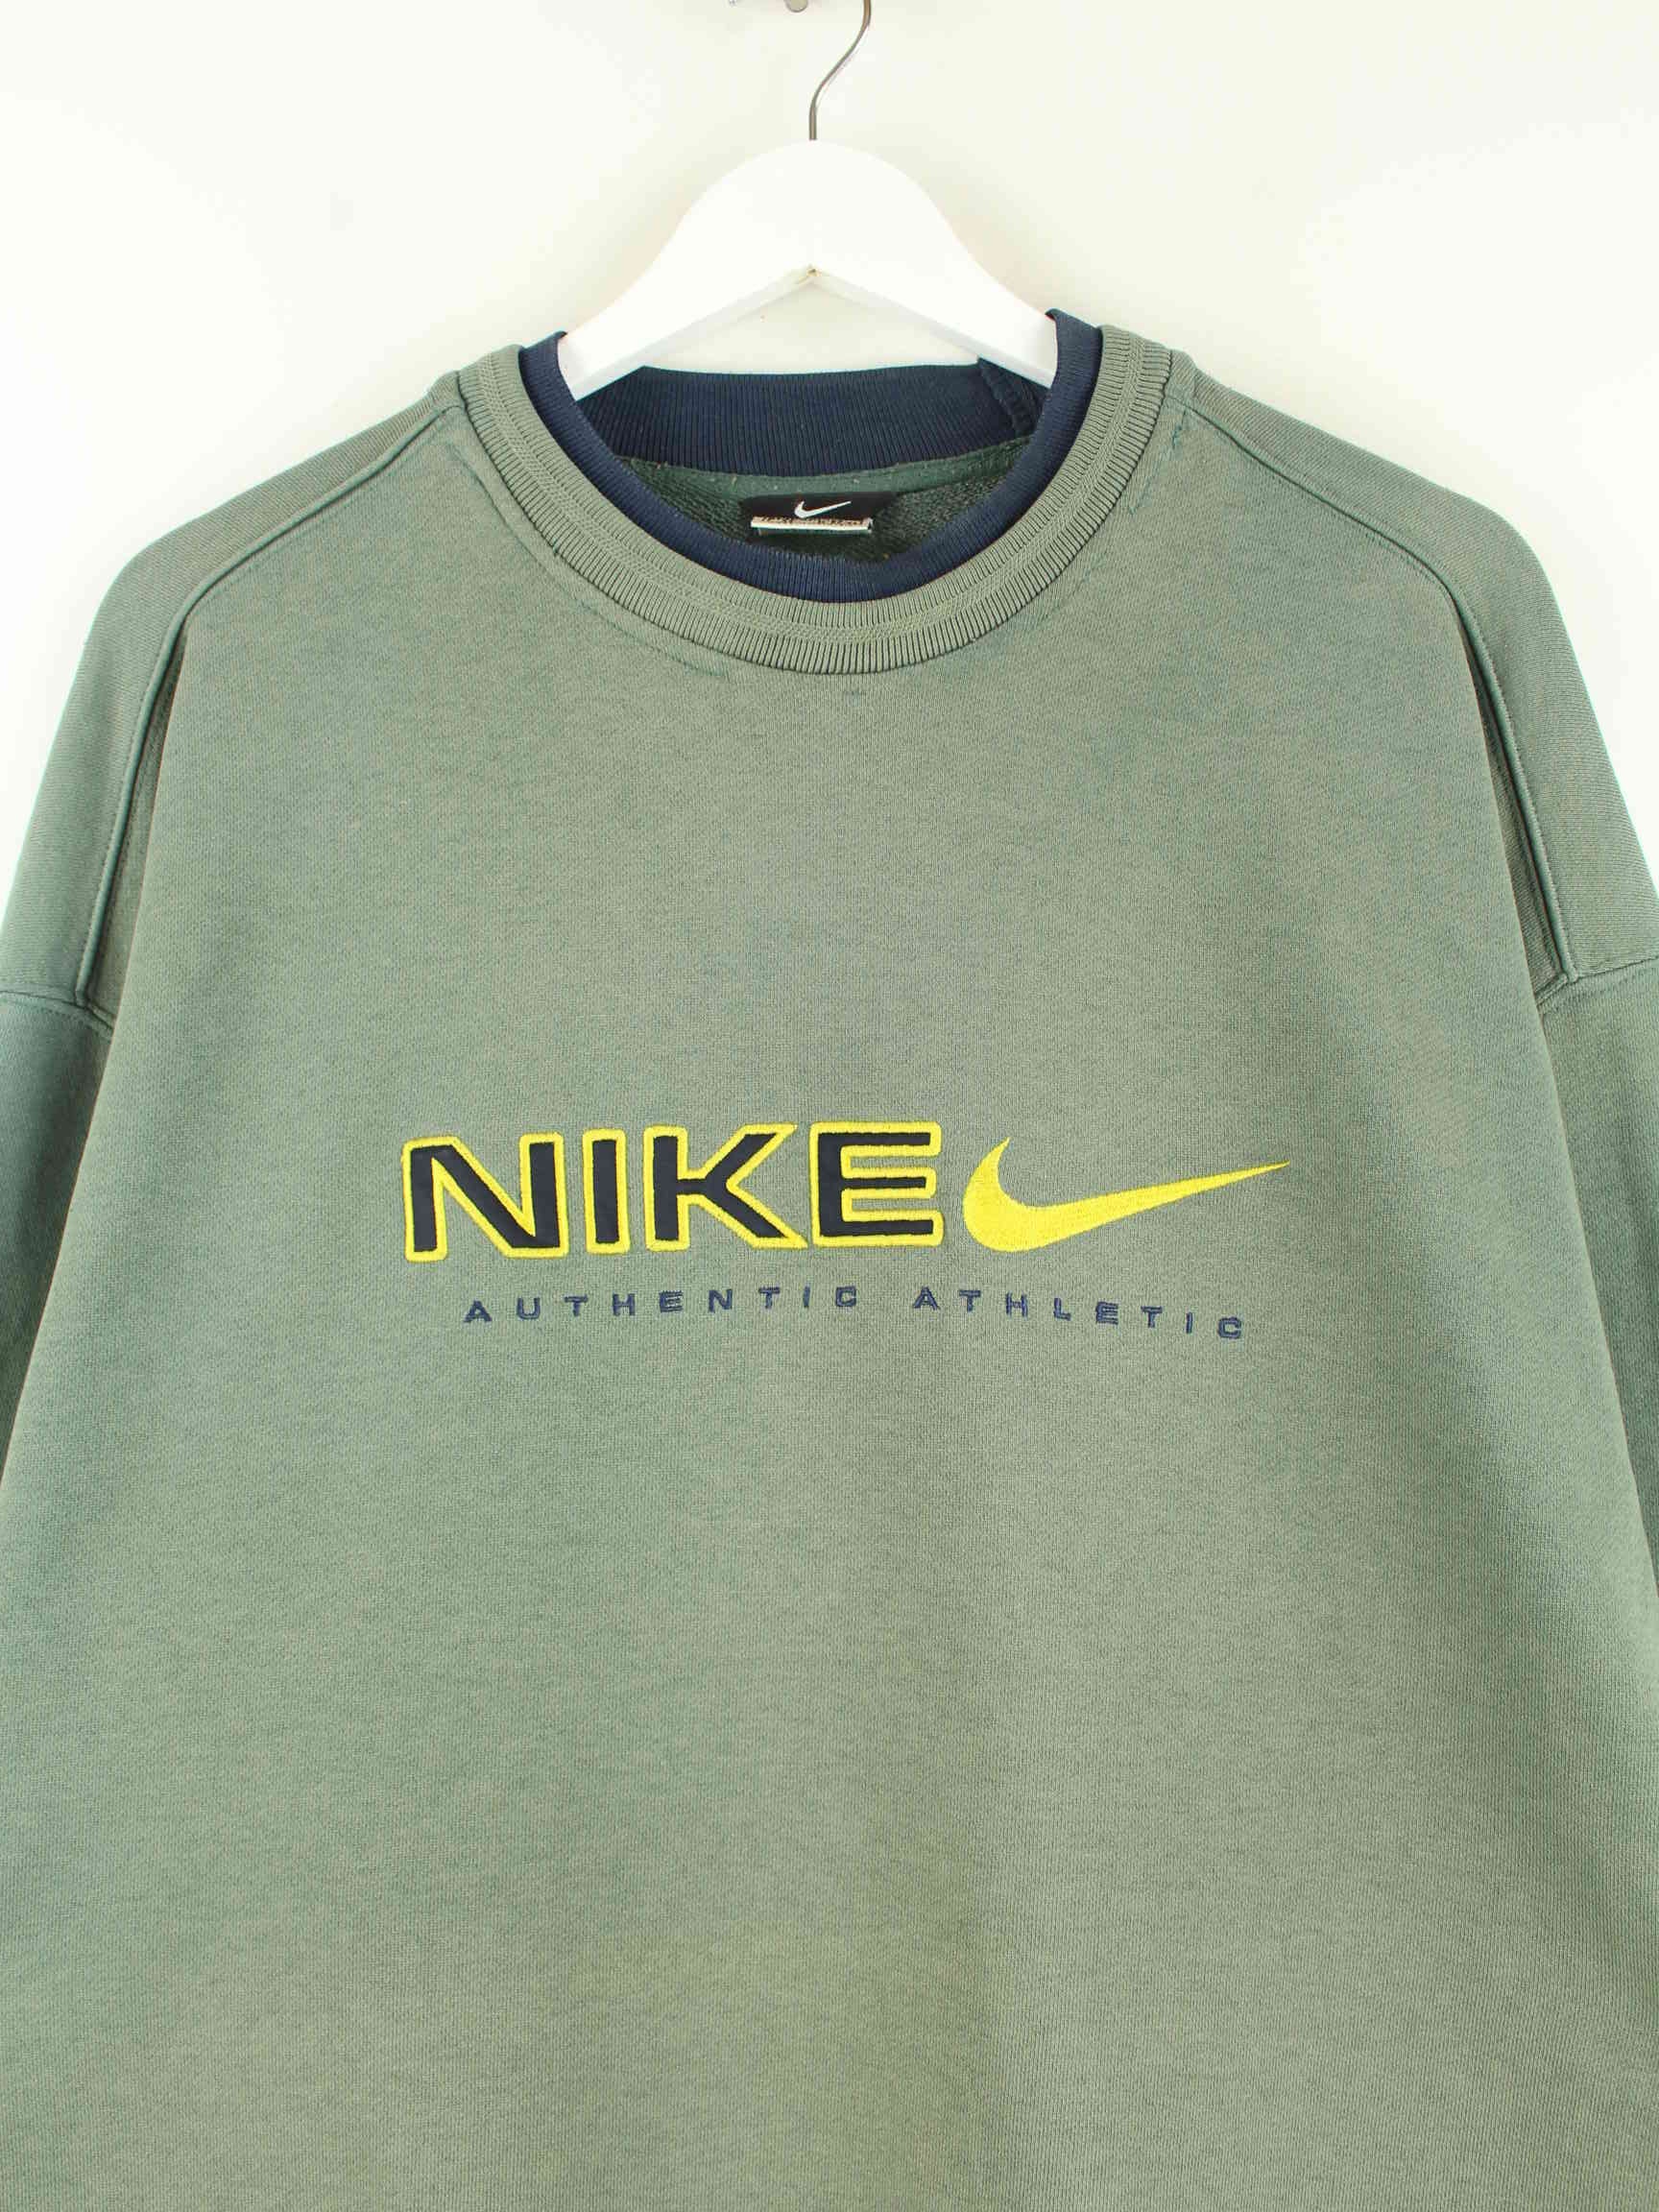 Nike 90s Vintage Embroidered Sweater Grün XL (detail image 1)